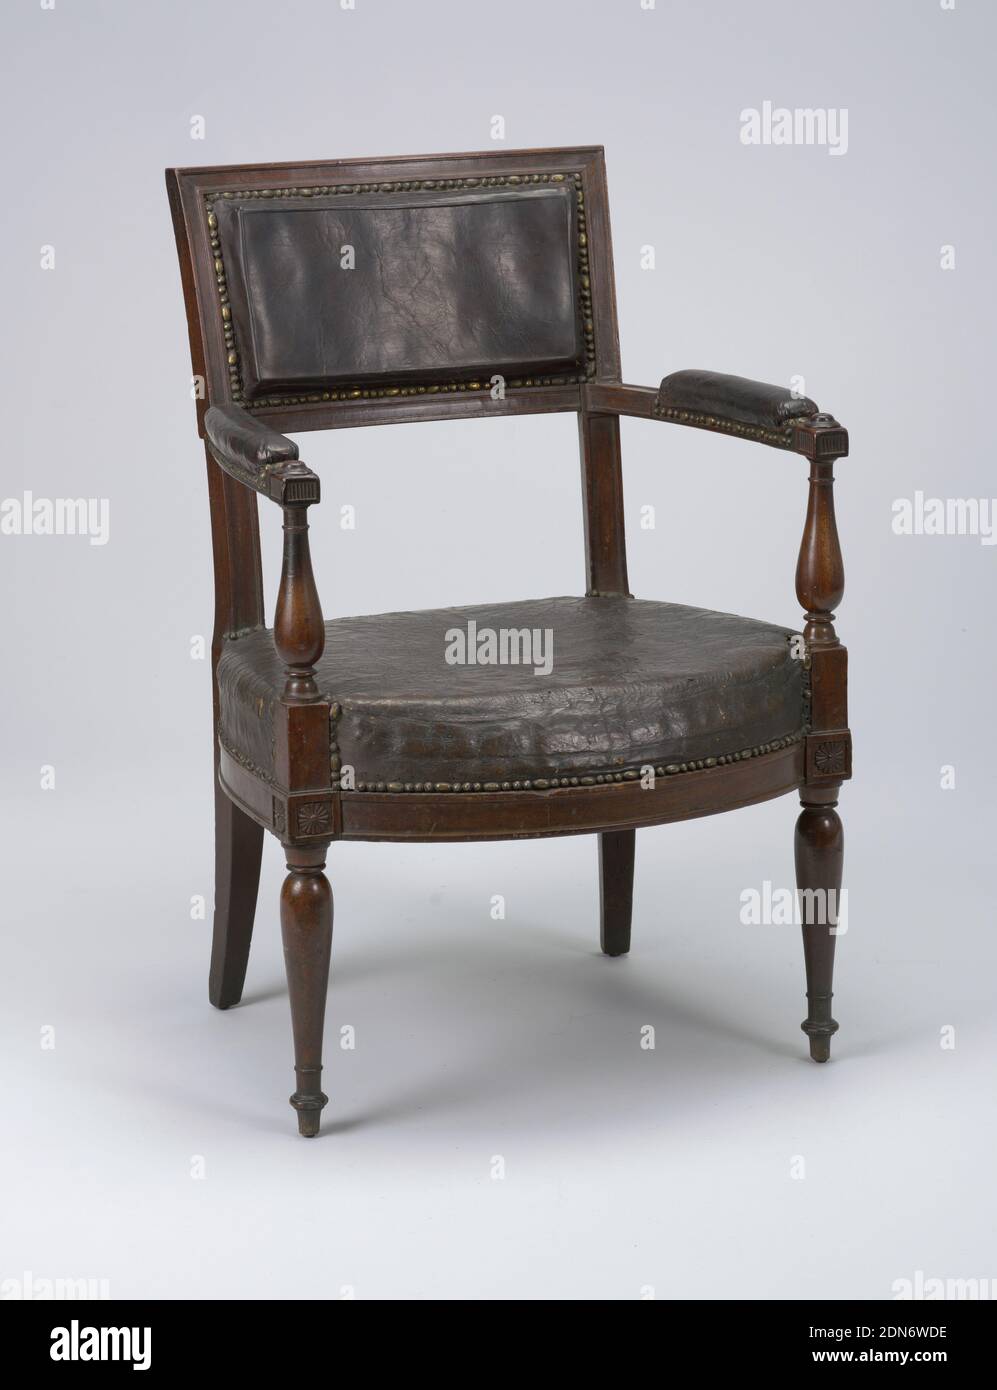 Armchair, mahogany, upholstered in nailed leather, Rectangular back. Flat padded arms curve outward and are supported by their turned stumps which are in one with the front legs, similarly turned. Bowed front and side seat rails received by rosetted reserves. Rear legs square and tapered. Upholstery is black leather nailed to frame., France, ca. 1790, furniture, Decorative Arts, Armchair Stock Photo